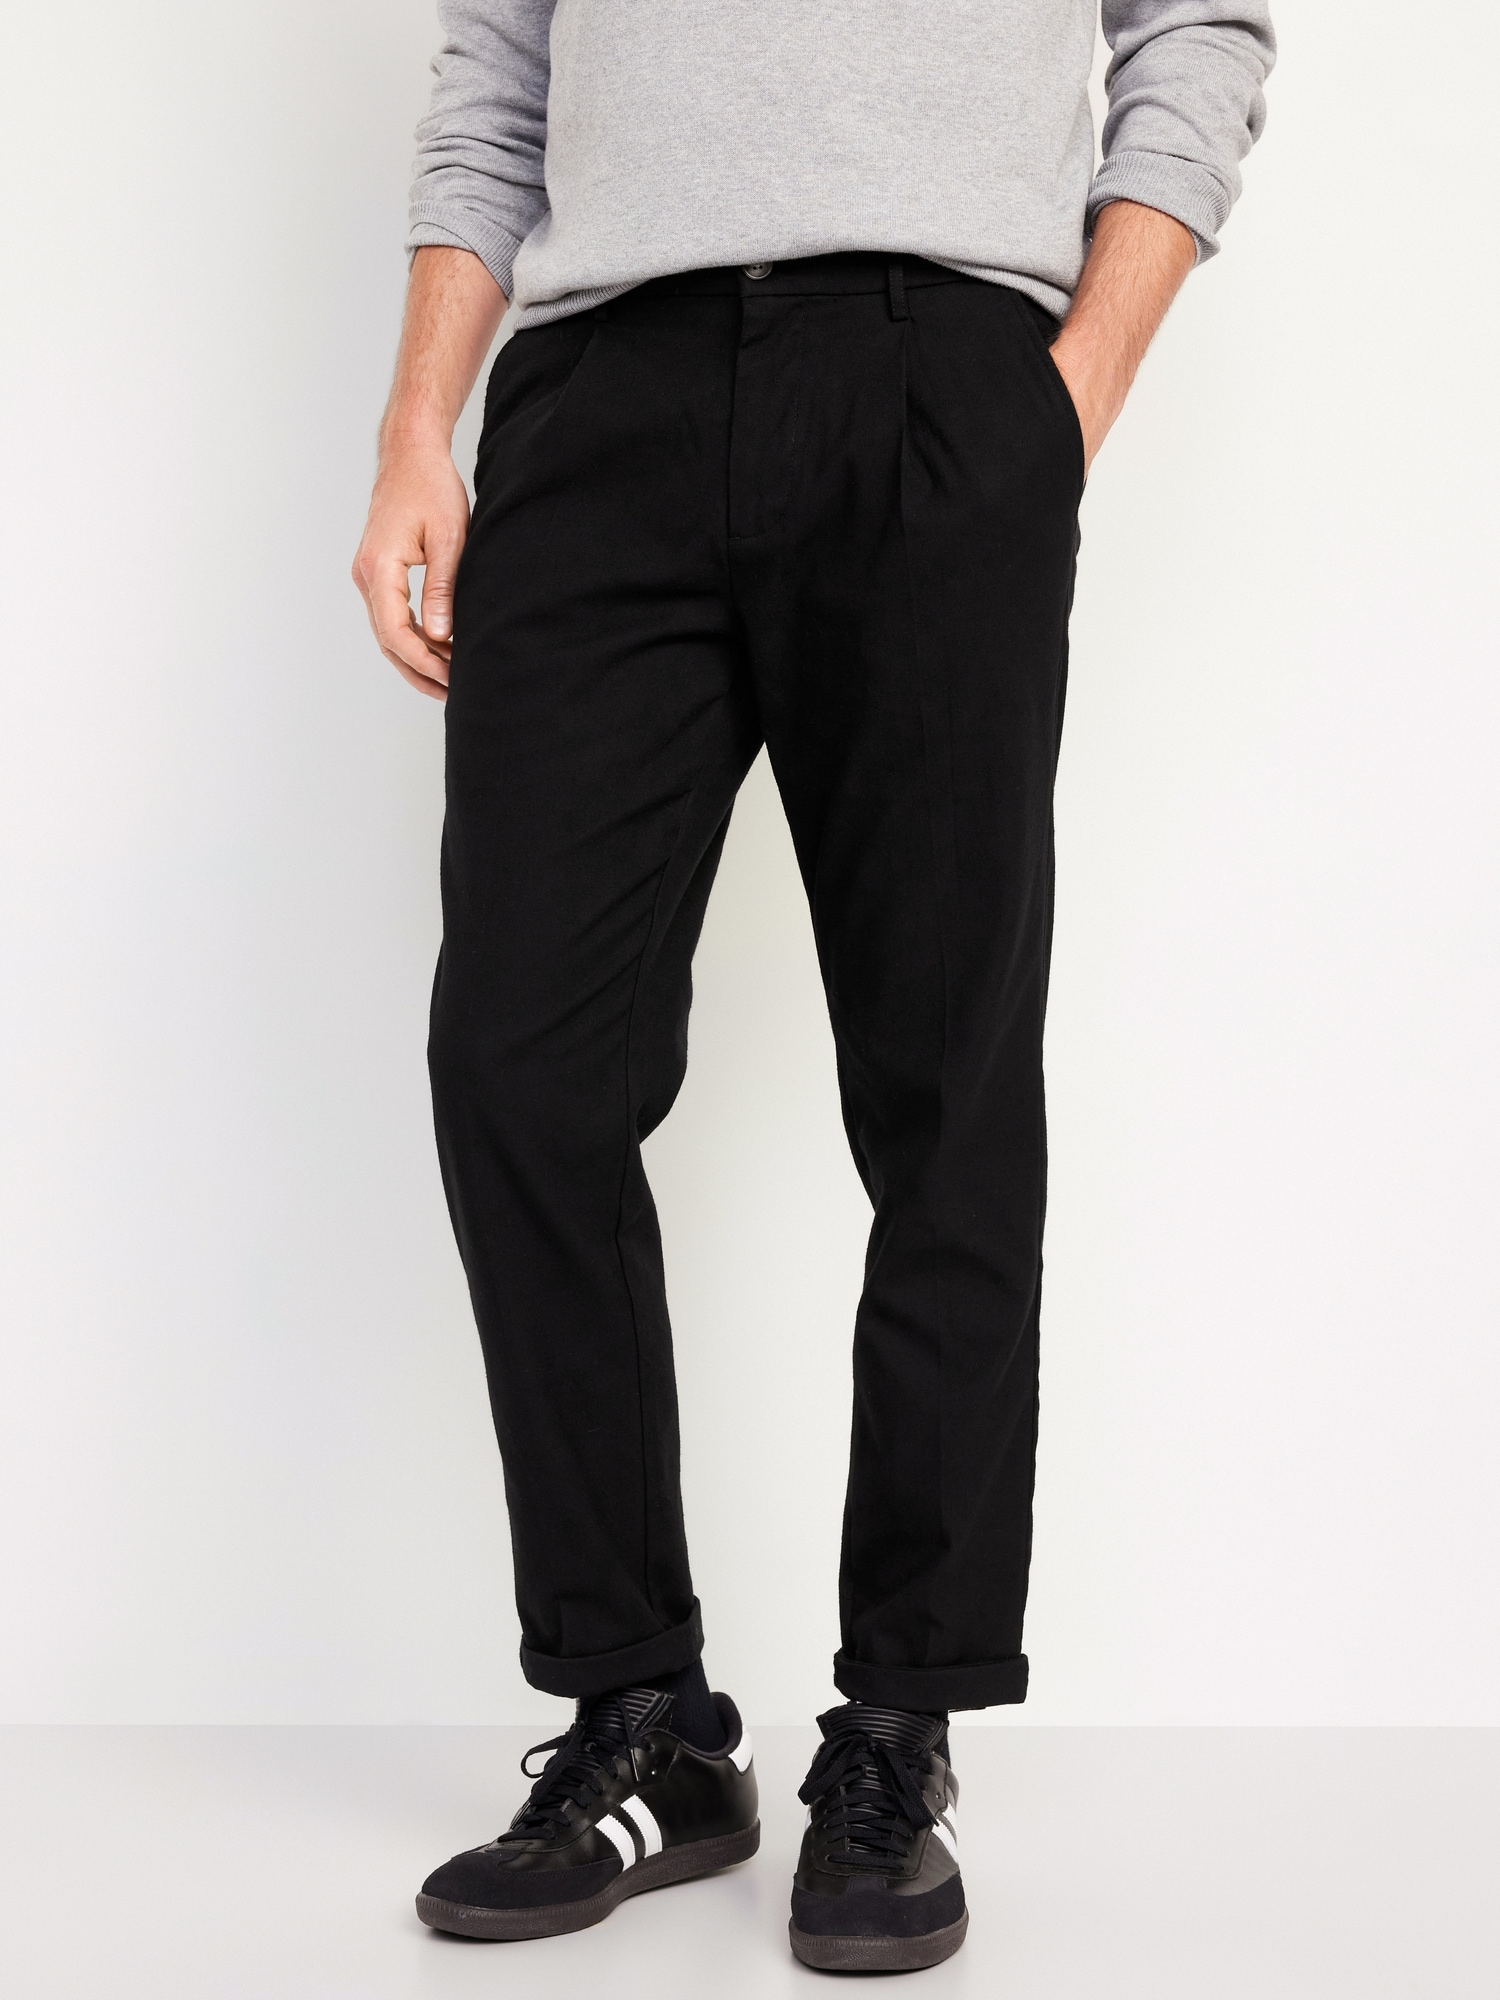 Loose Taper Built-In Flex Pleated Chino Pants | Old Navy